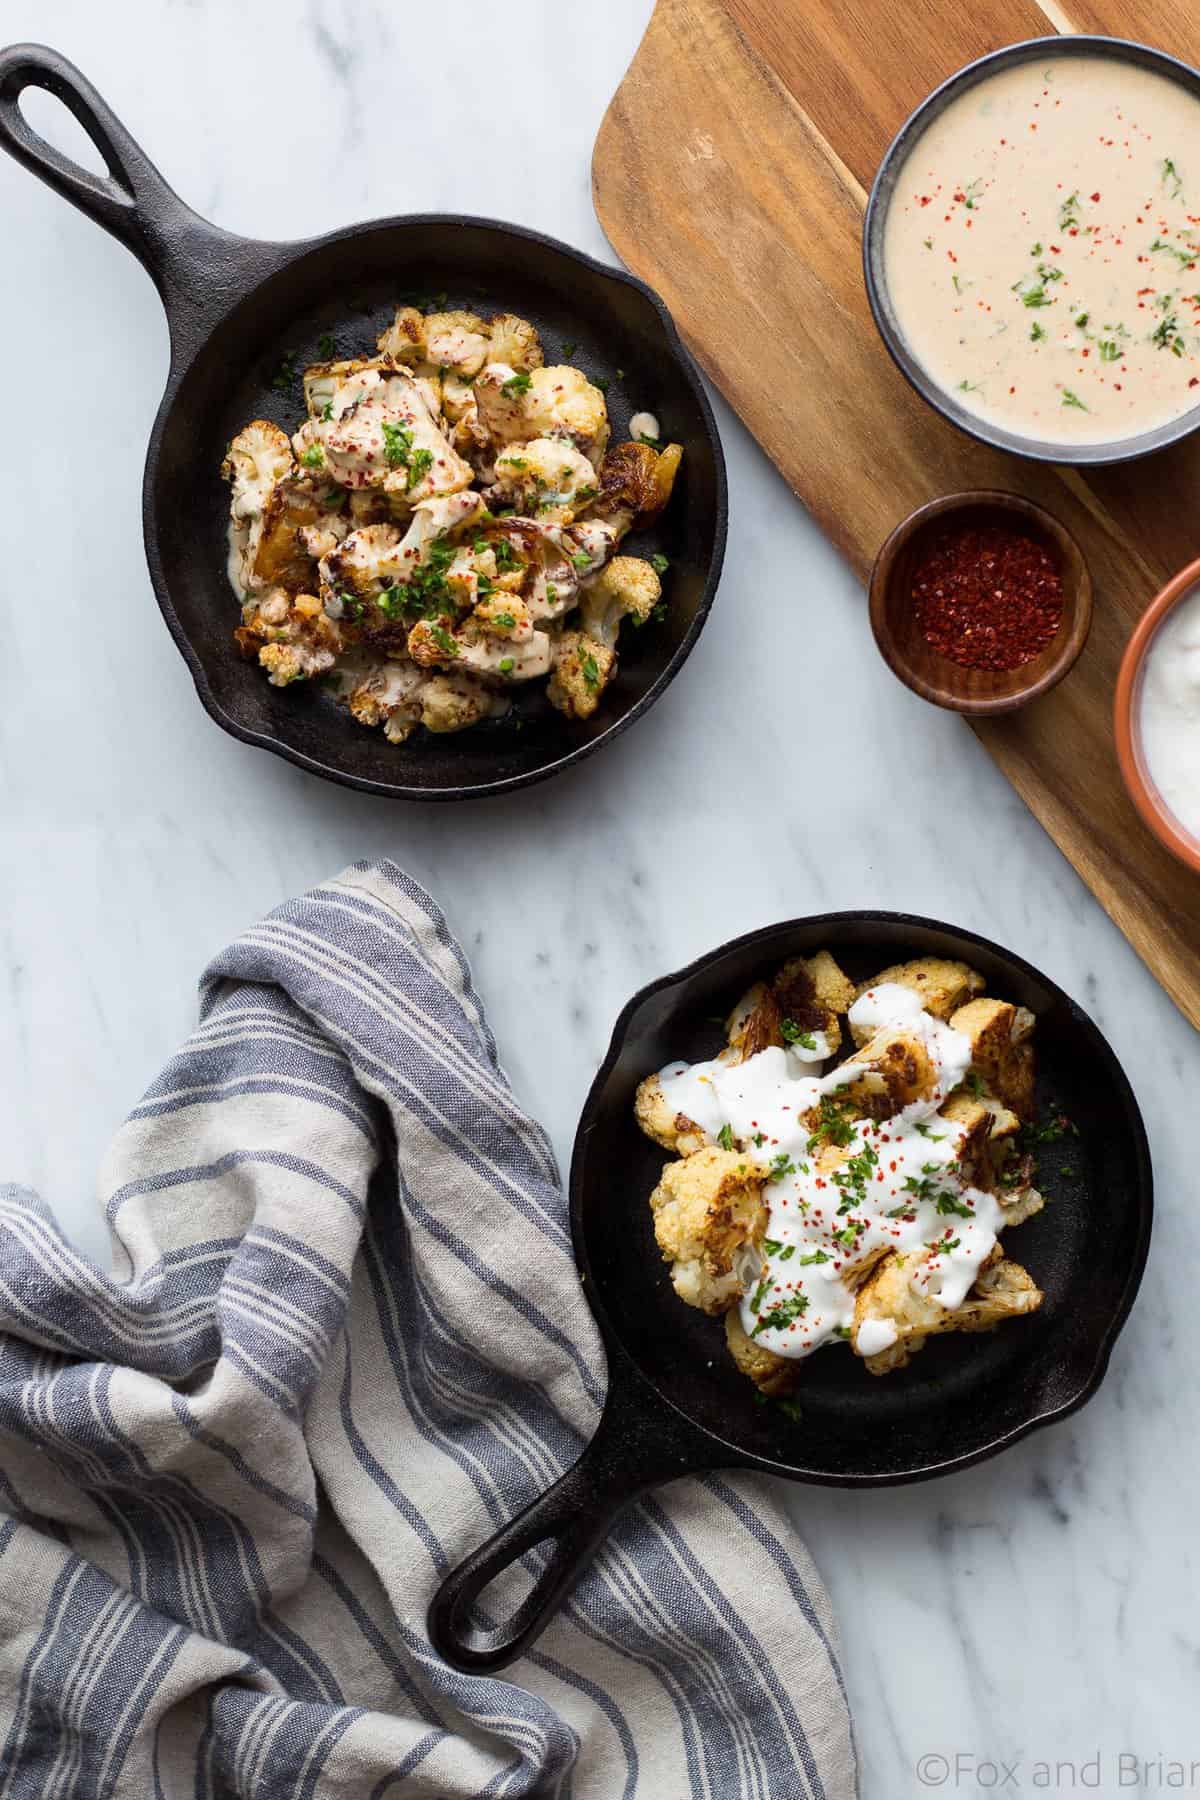 Roasted Cauliflower With Yogurt Sauce AND a dairy free tahini sauce! You won't beleive how addictive this dish is with caramelized cauliflower, a zingy yogurt sauce and a tasty tahini sauce for peope who prefer not to eat dairy.